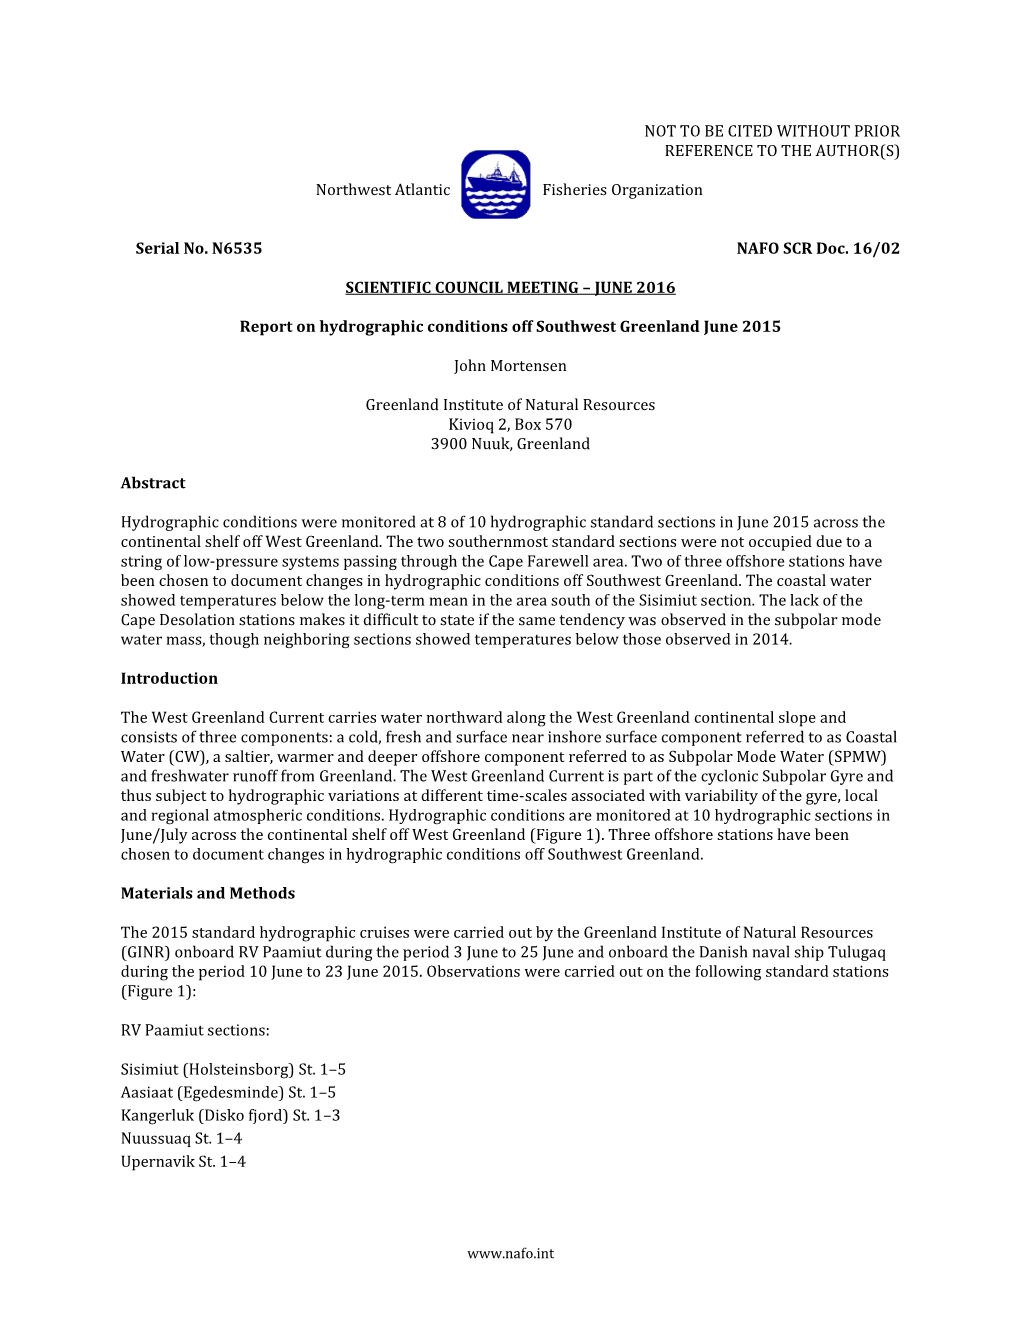 Report on Hydrographic Conditions Off Southwest Greenland June 2015